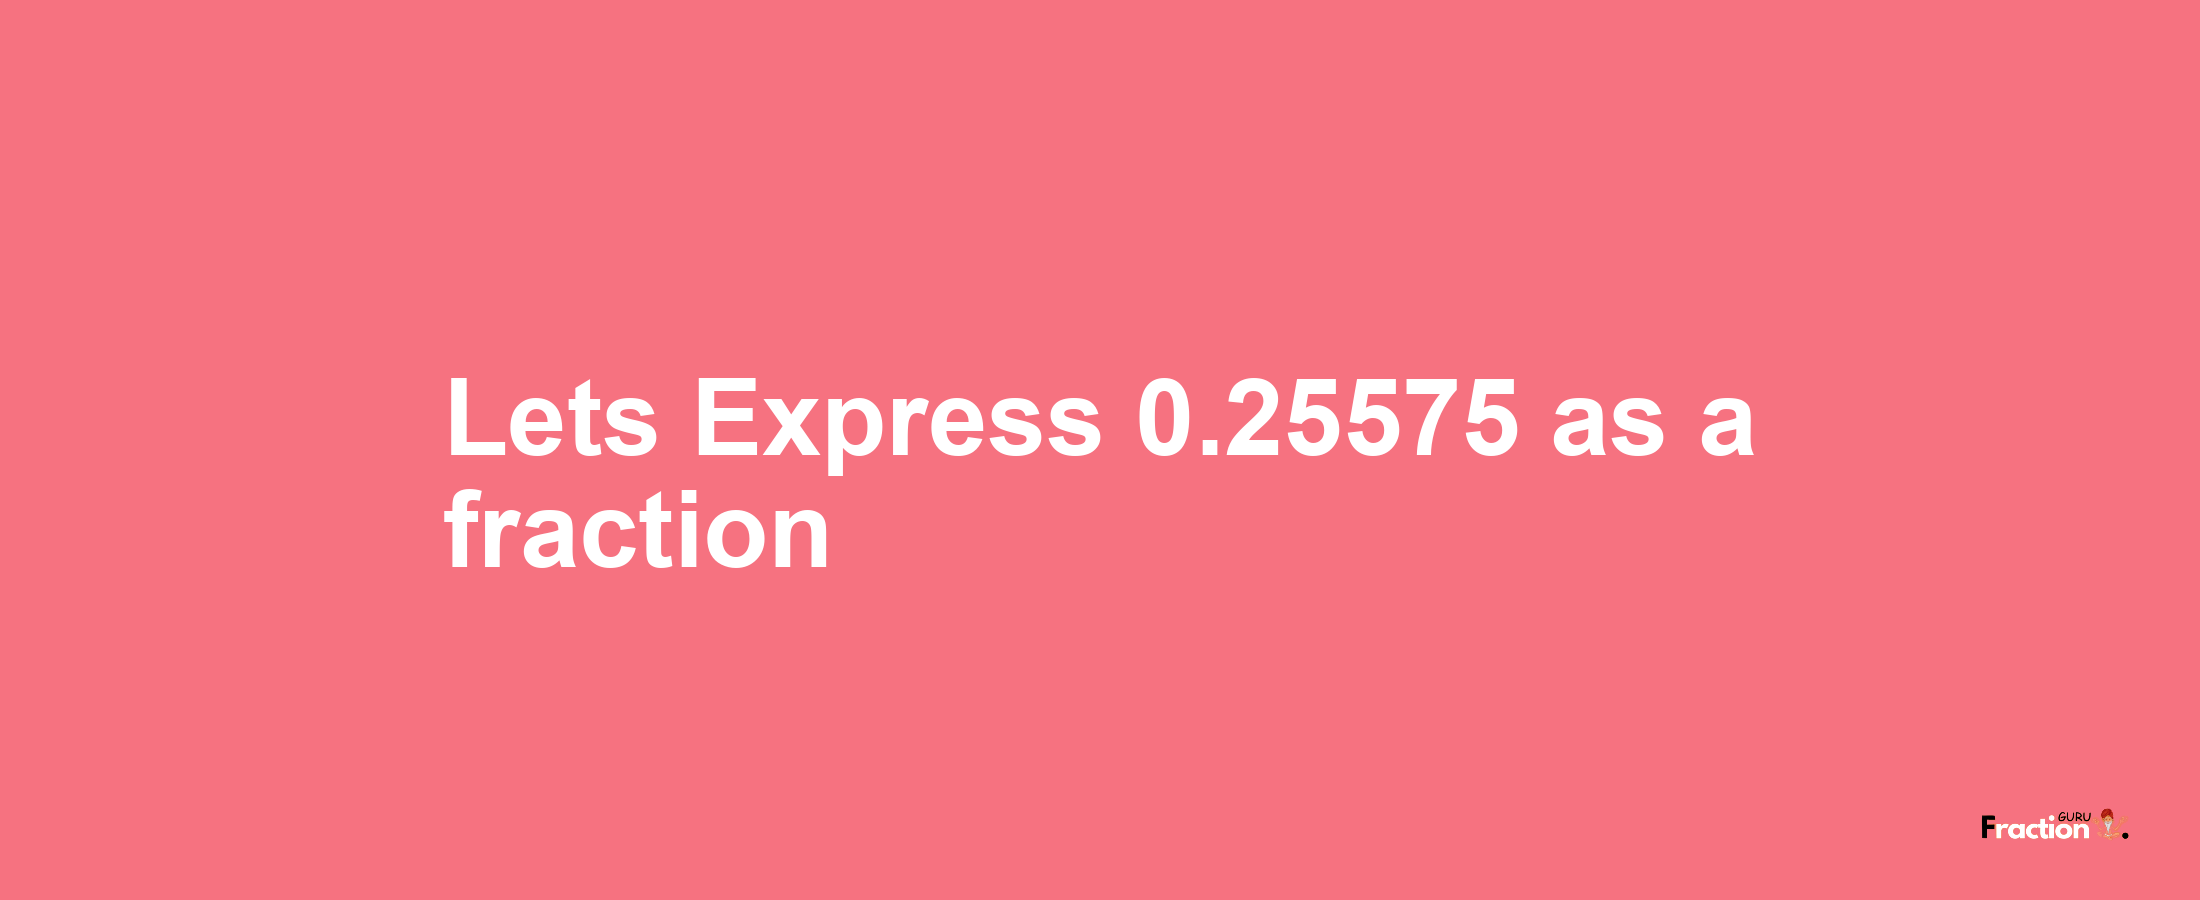 Lets Express 0.25575 as afraction